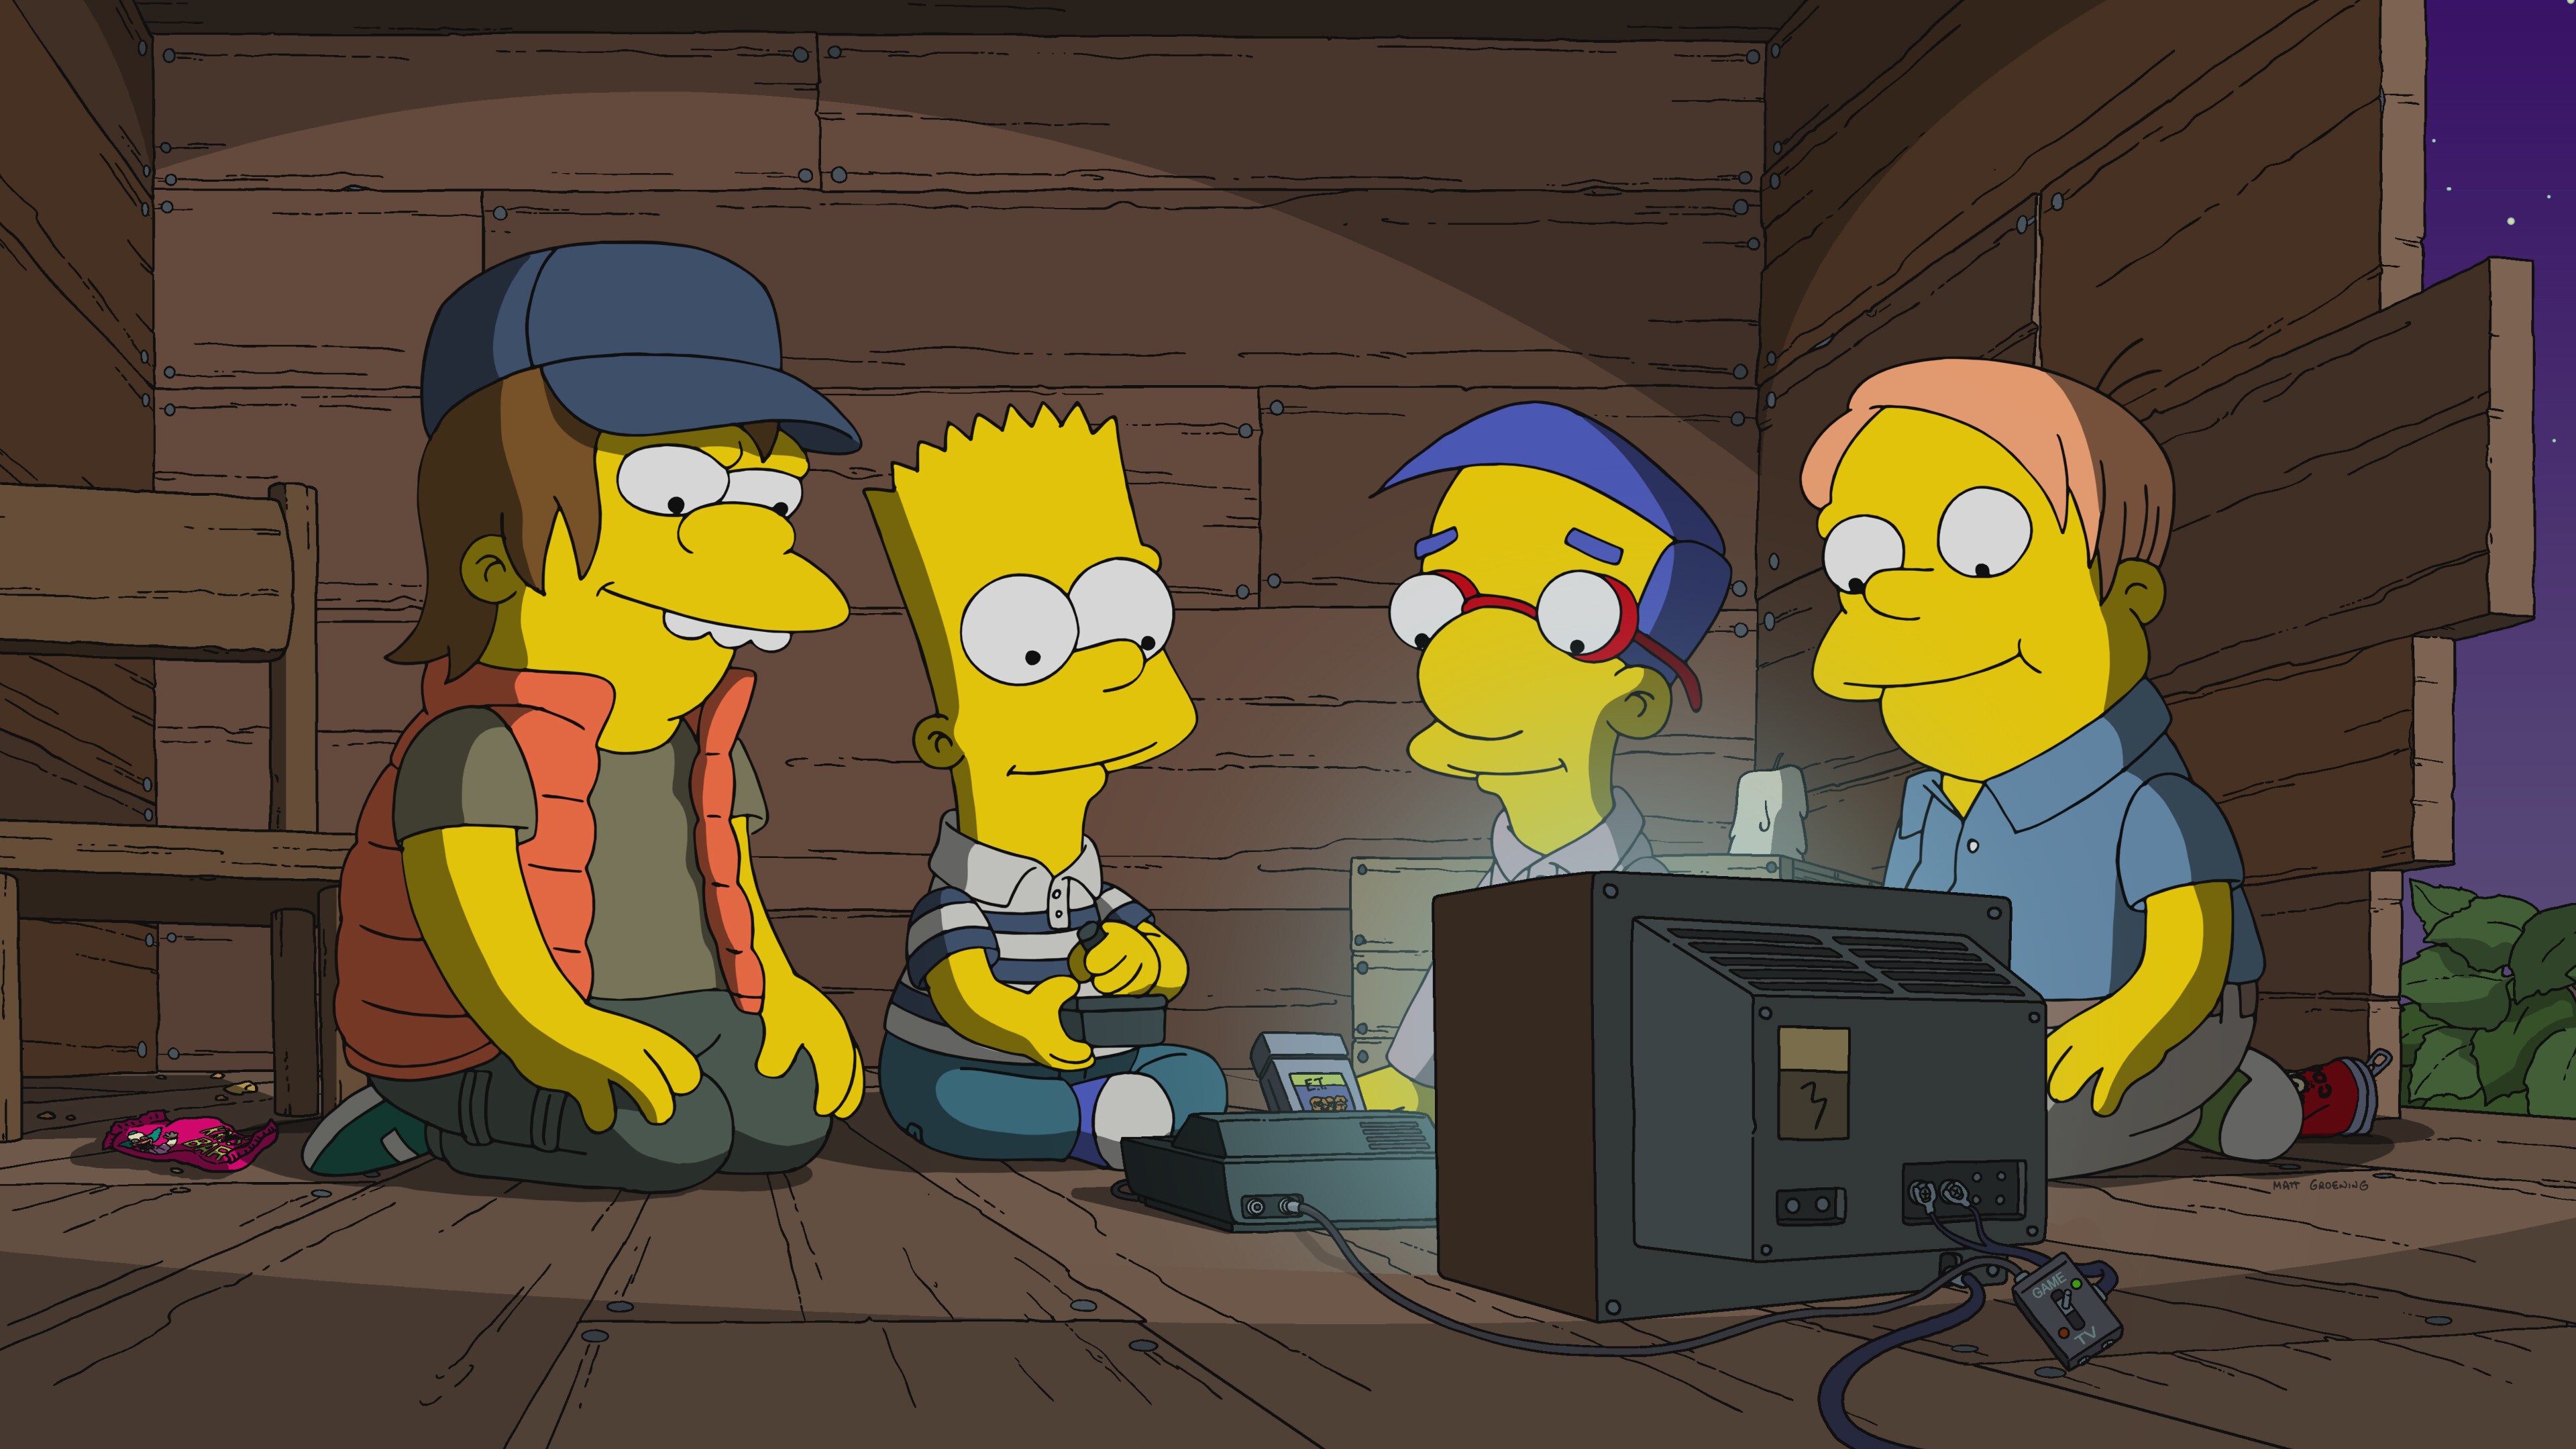 THE SIMPSONS: The 30th Treehouse of Horror features a demon Maggie, a mission to rescue Milhouse from another dimension, dead-Homer’s spirit trying on some new bodies for size and Selma finally finding love in an unlikely place – the alien in the basement. Don’t miss the “Treehouse of Horror XXX” episode of THE SIMPSONS.